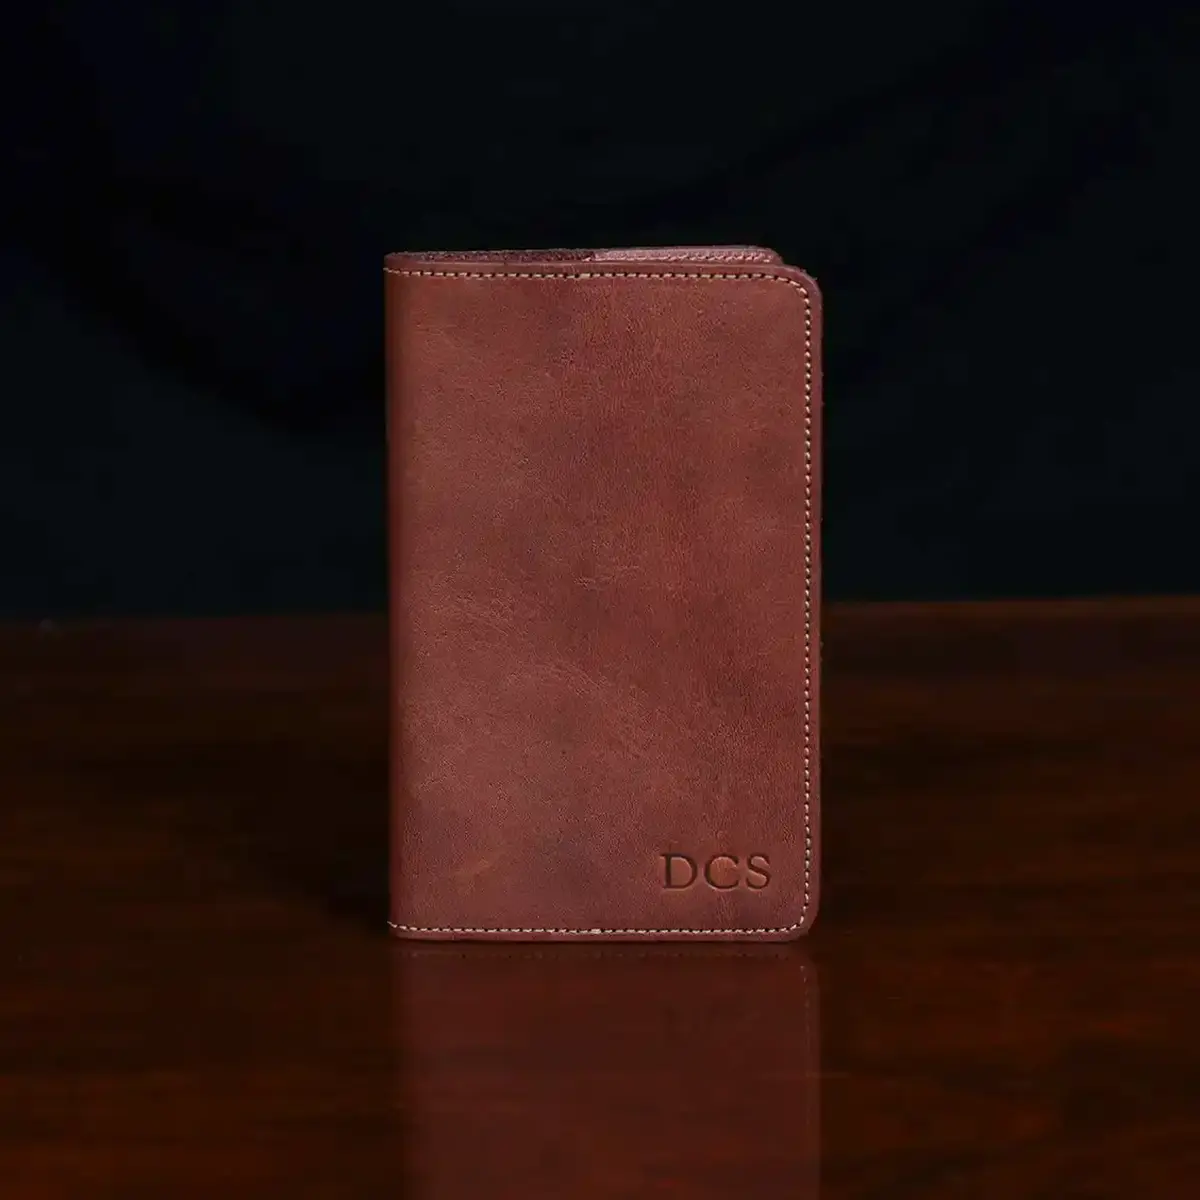 no 27 pocket journal showing the front side